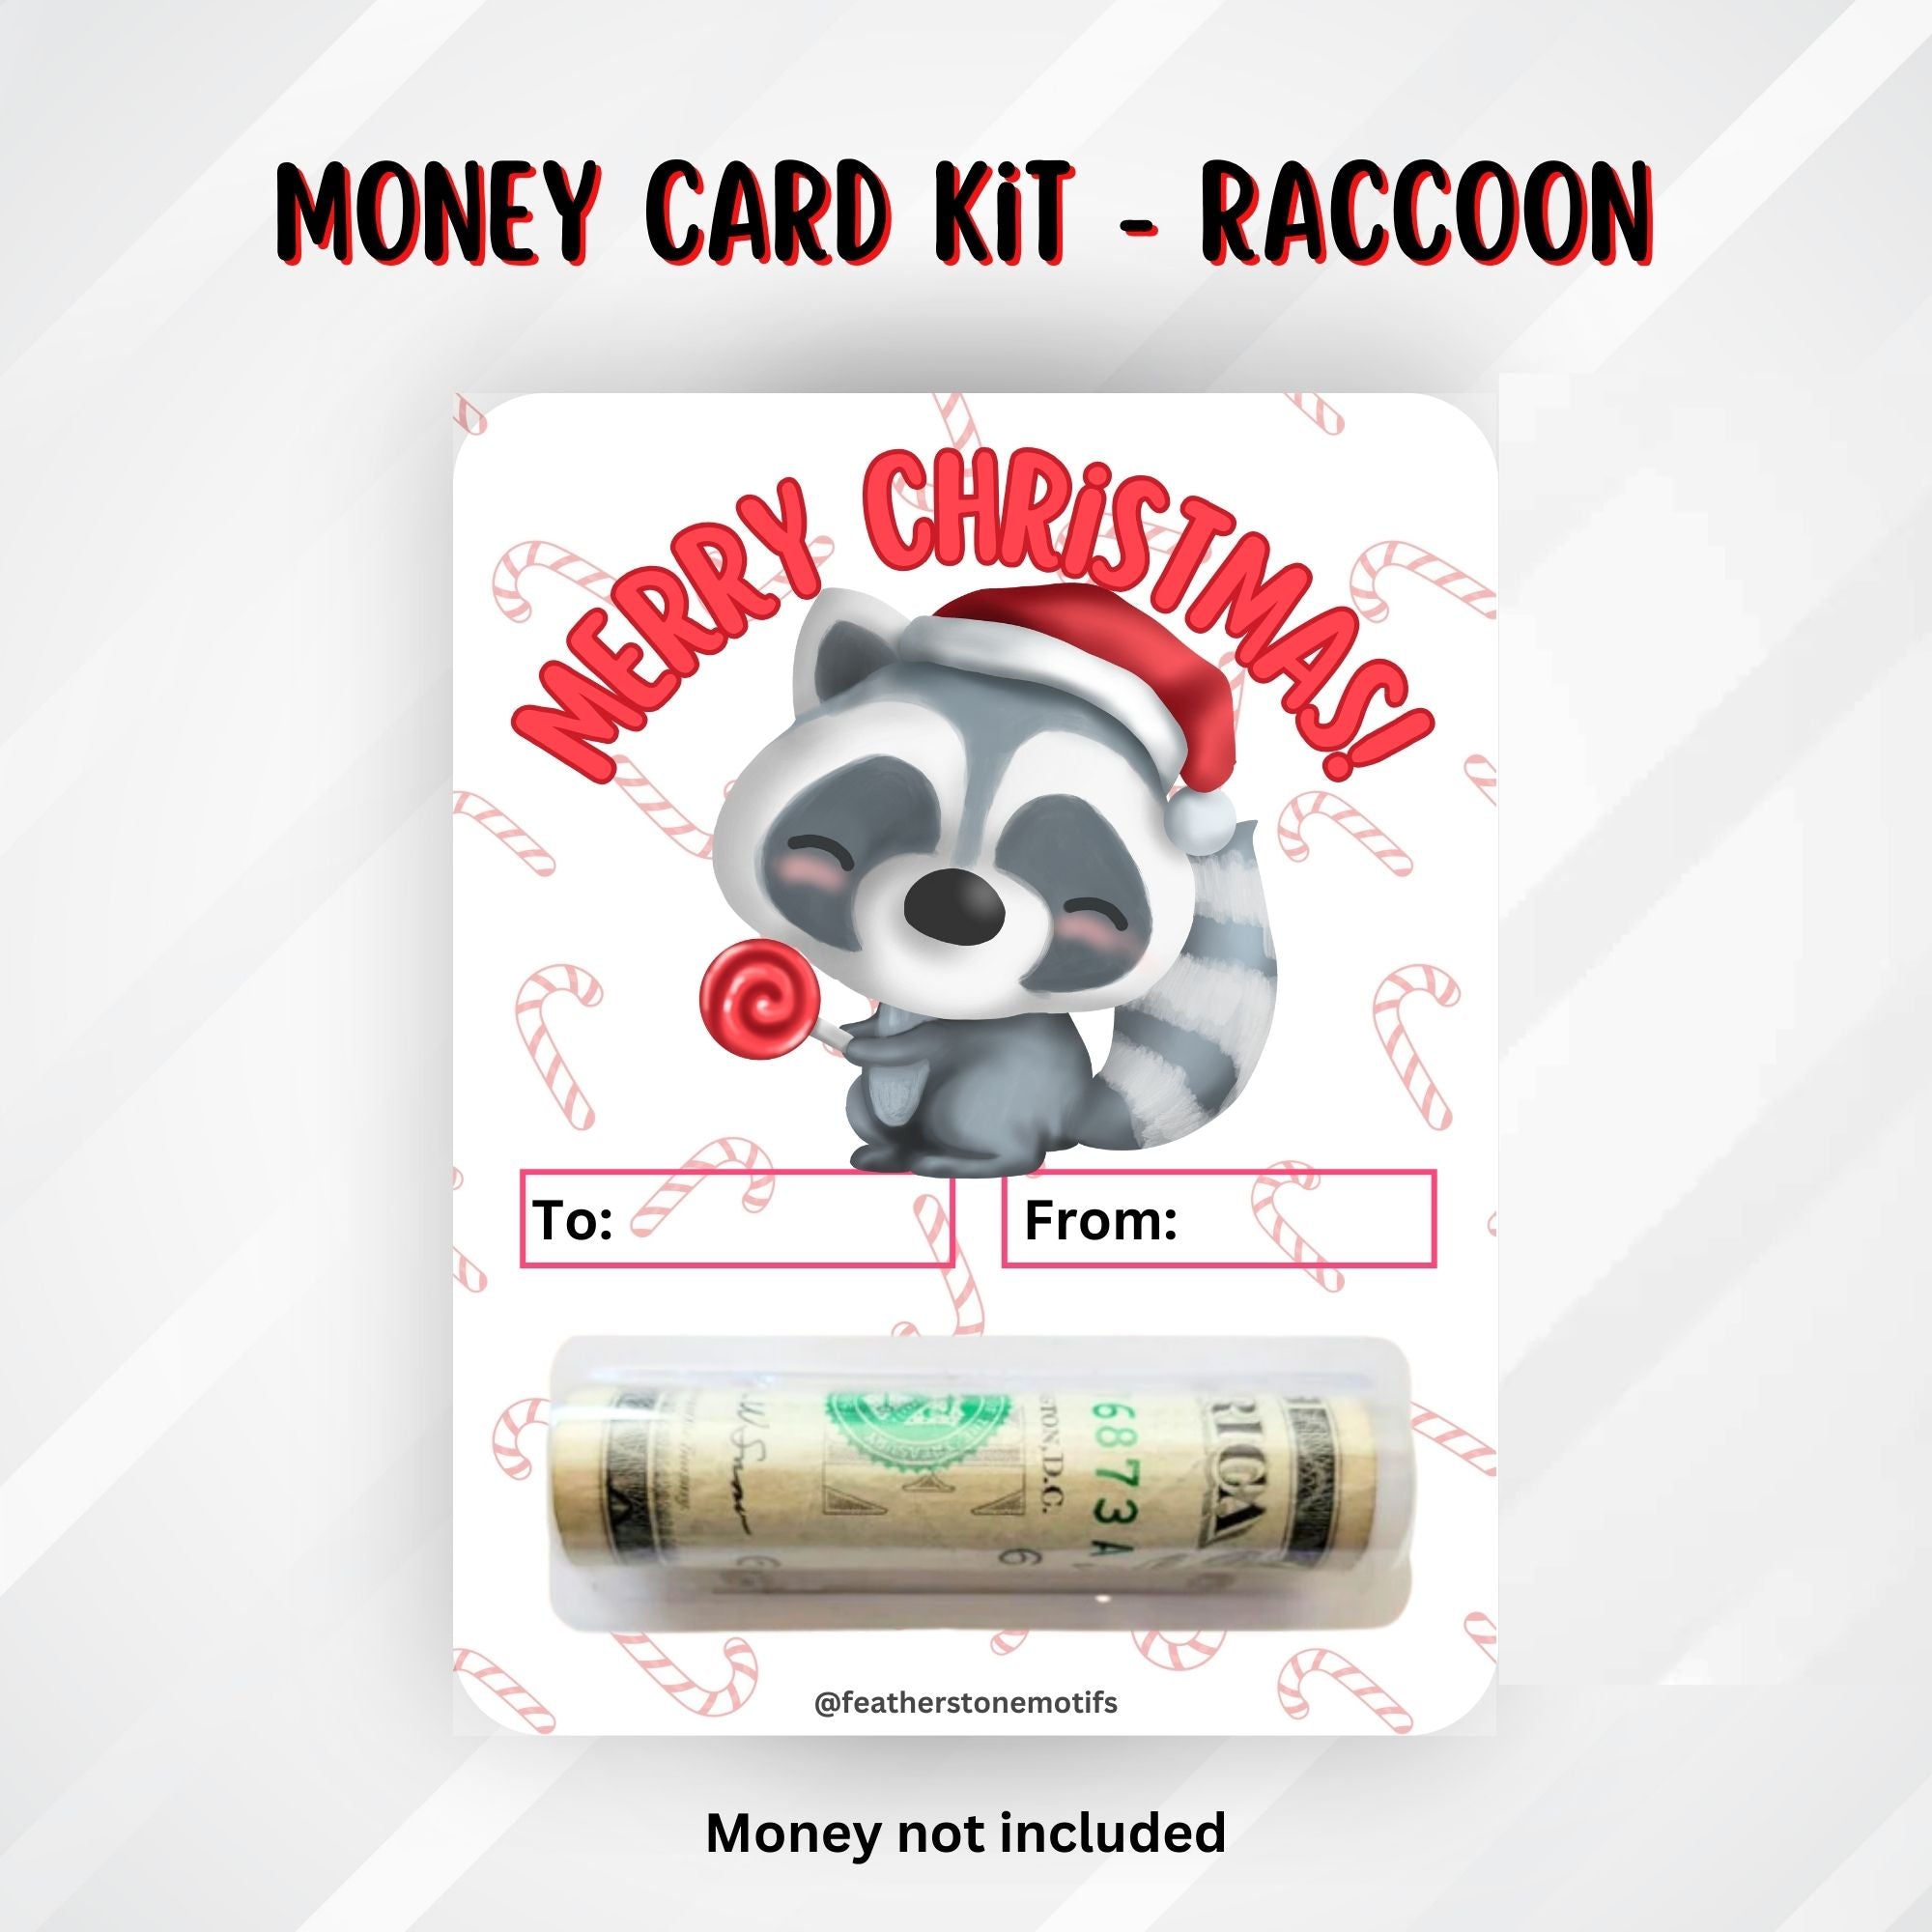 This image shows the money tube attached to the Christmas Raccoon Money Card.